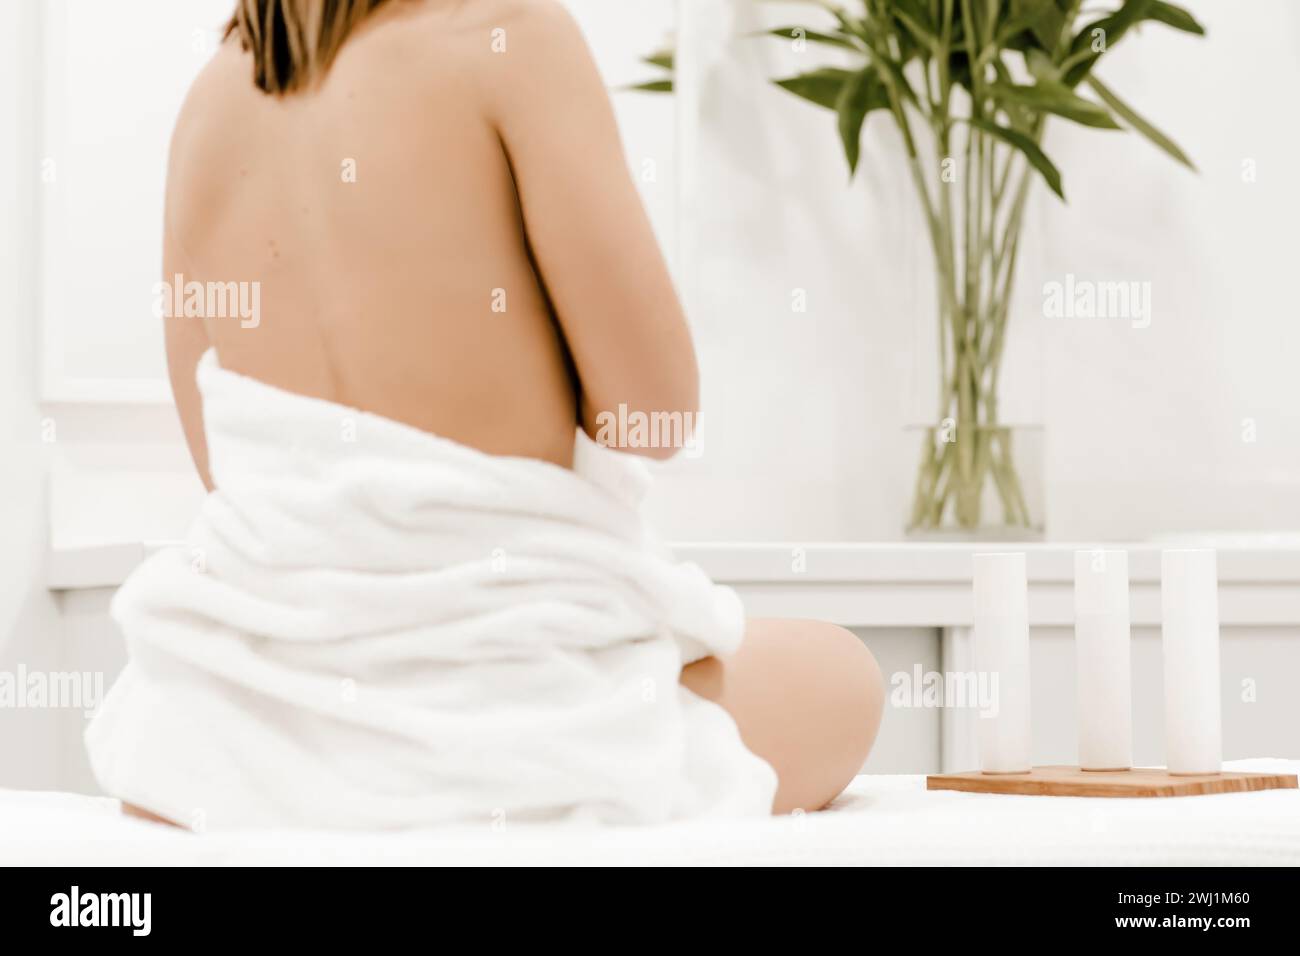 Woman seated on a spa bed, back facing, covered with a towel, beside three beauty products in an aesthetic center, evoking a serene spa ambiance Stock Photo